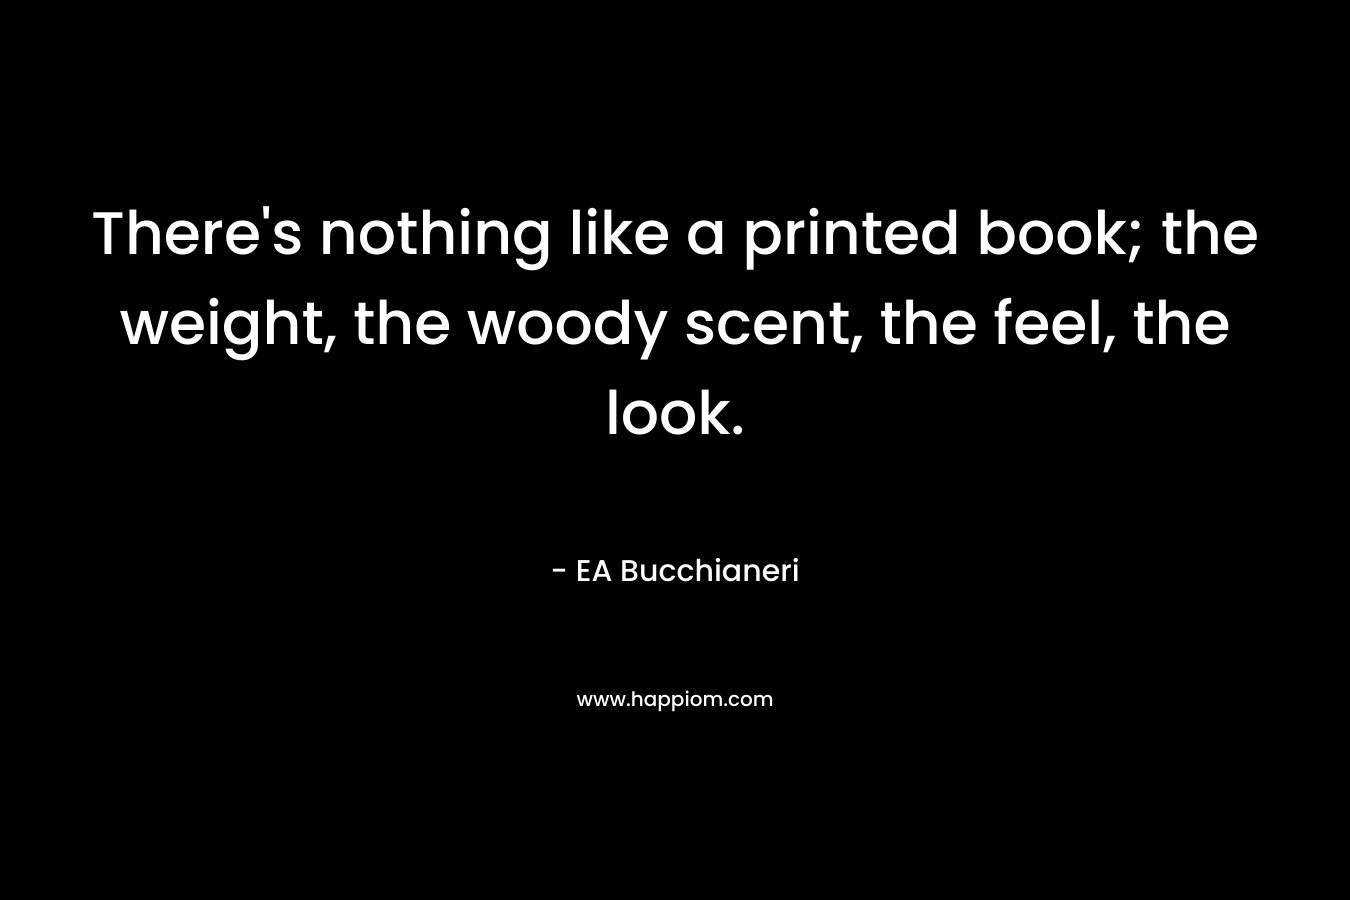 There’s nothing like a printed book; the weight, the woody scent, the feel, the look. – EA Bucchianeri